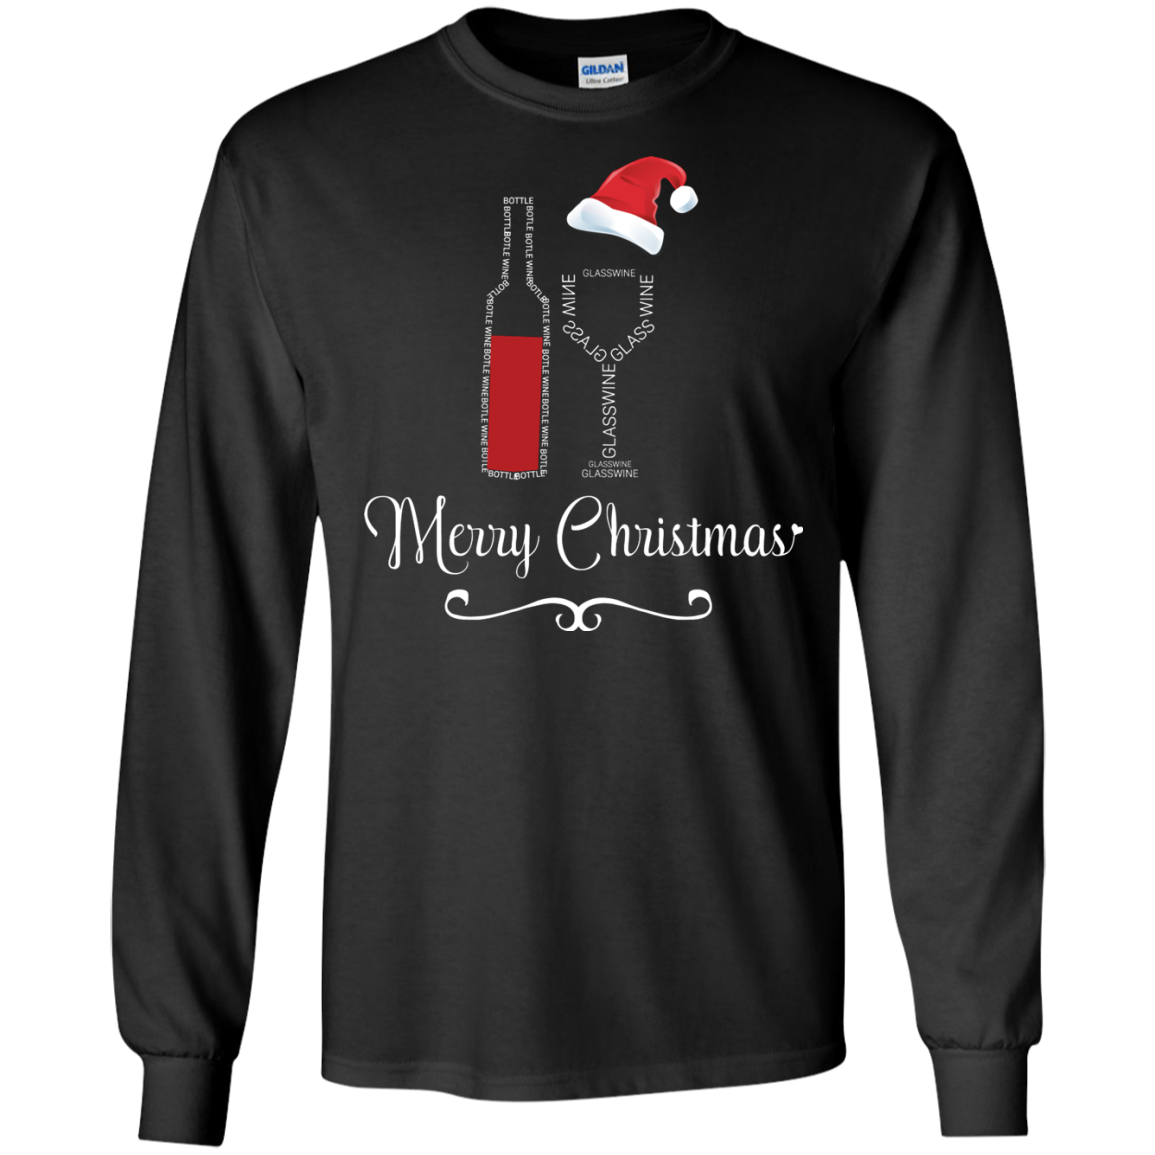 Christmas T-shirt Merry Christmas With Wine Botle And Glass Wine